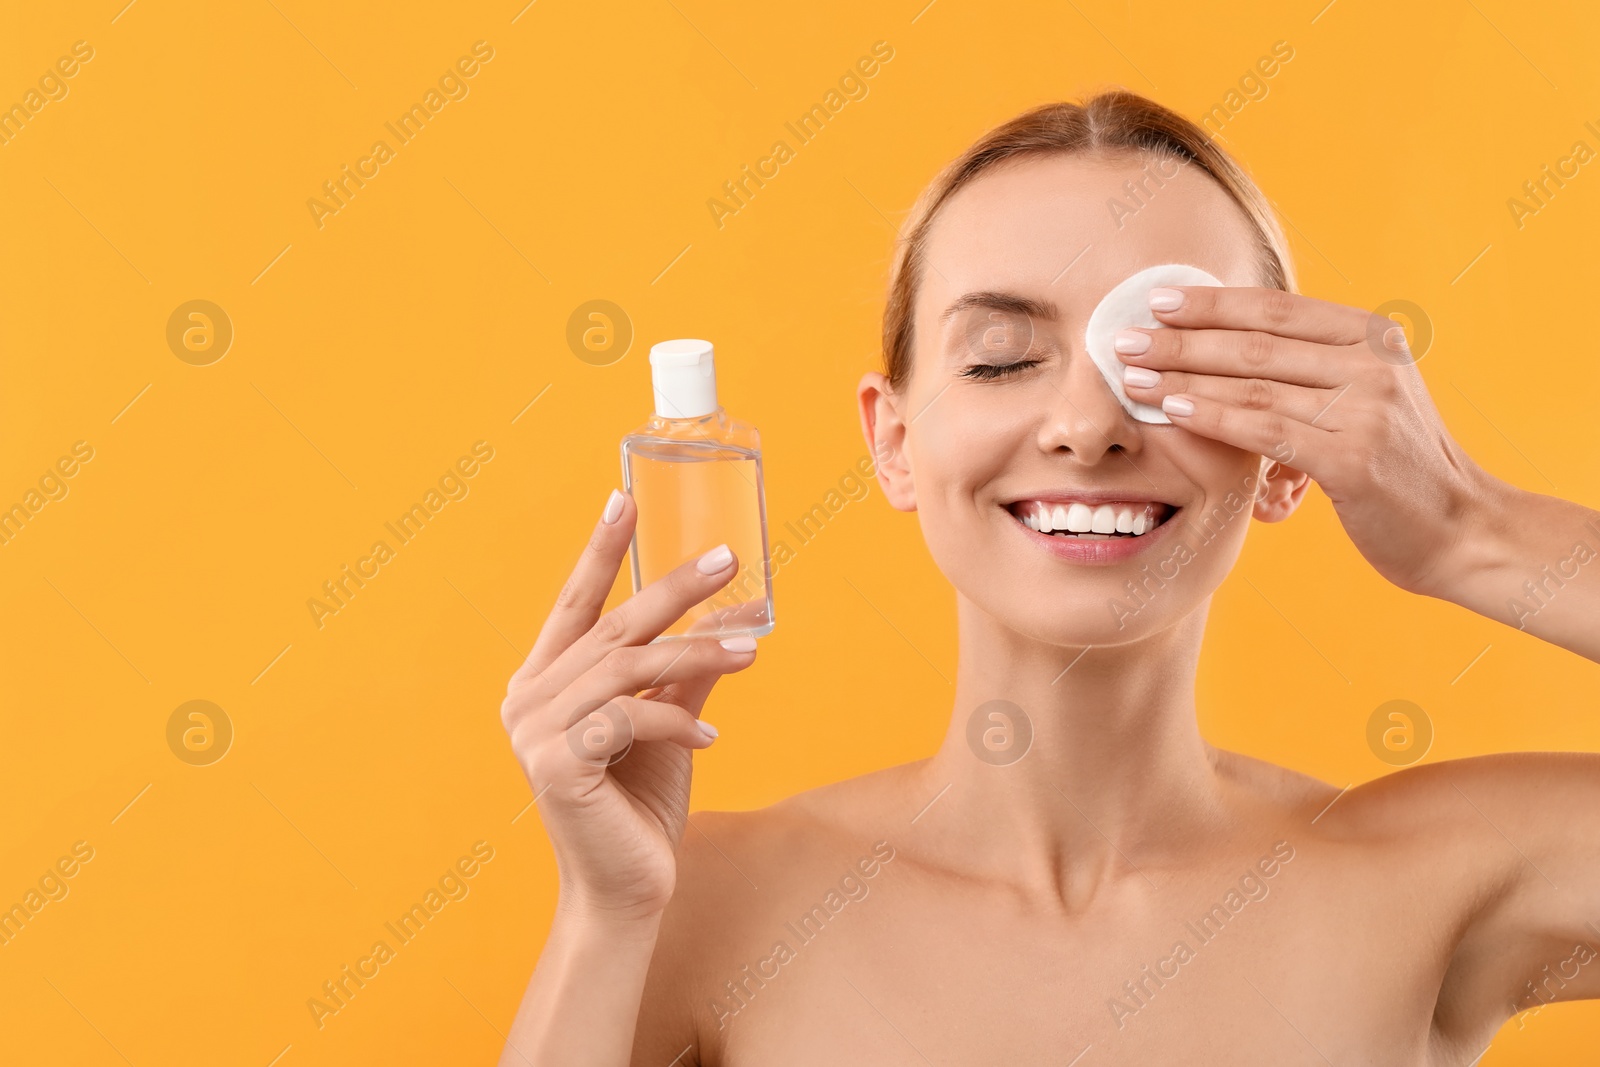 Photo of Smiling woman removing makeup with cotton pad and holding bottle on yellow background. Space for text